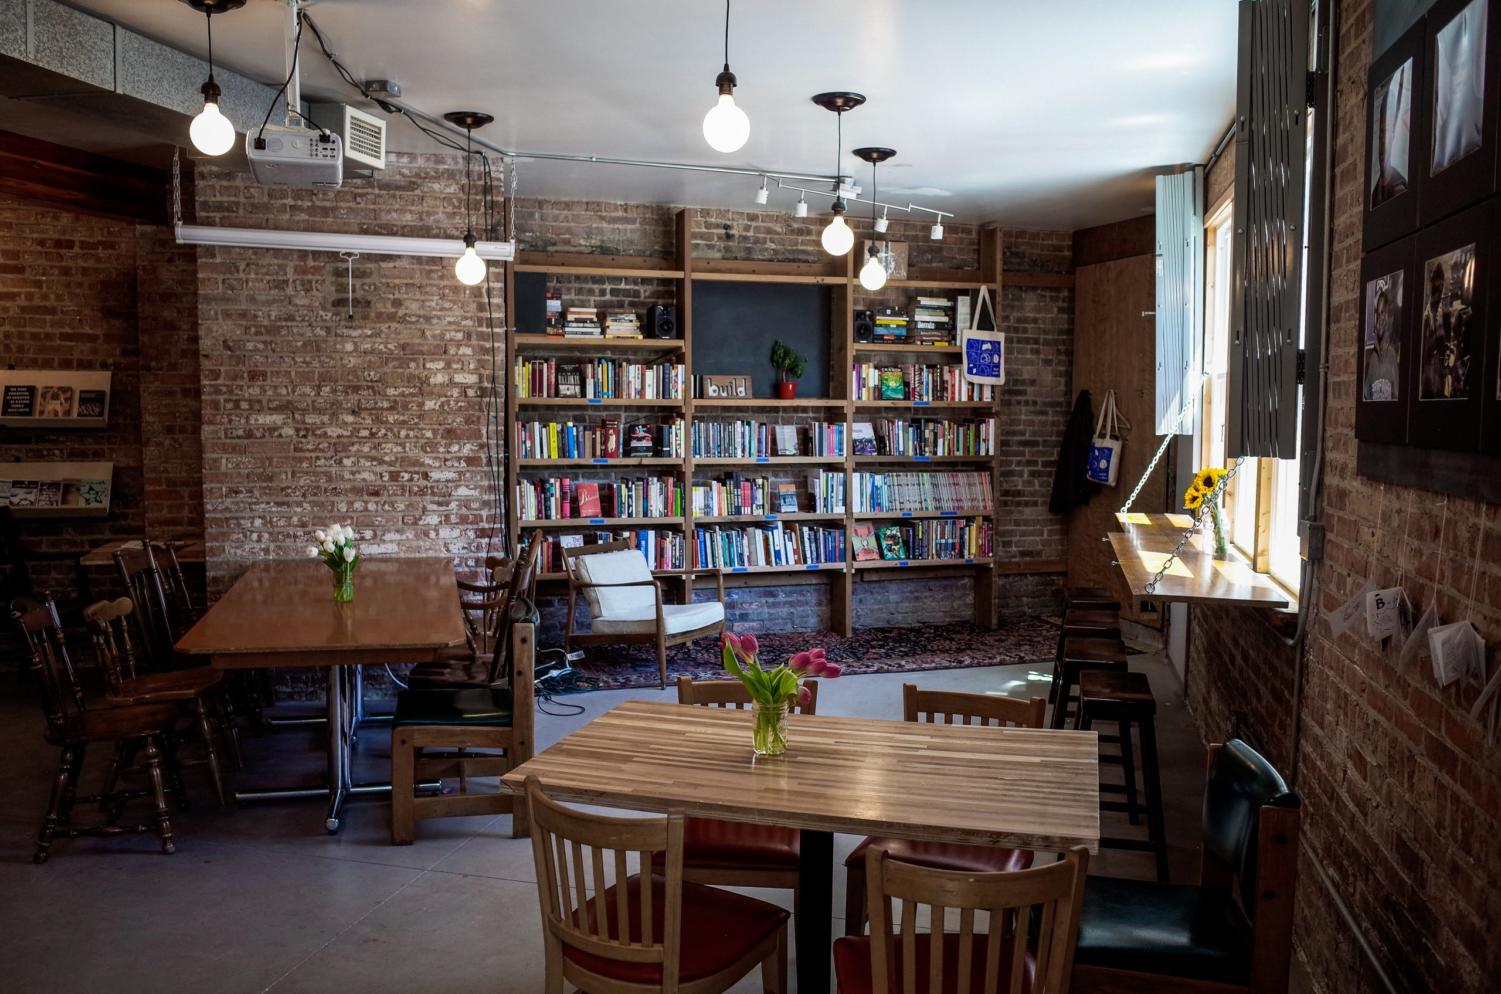 Build Coffee, located at 6100 South Blackstone Ave, is the newest coffee shop and bookstore in Hyde Park.